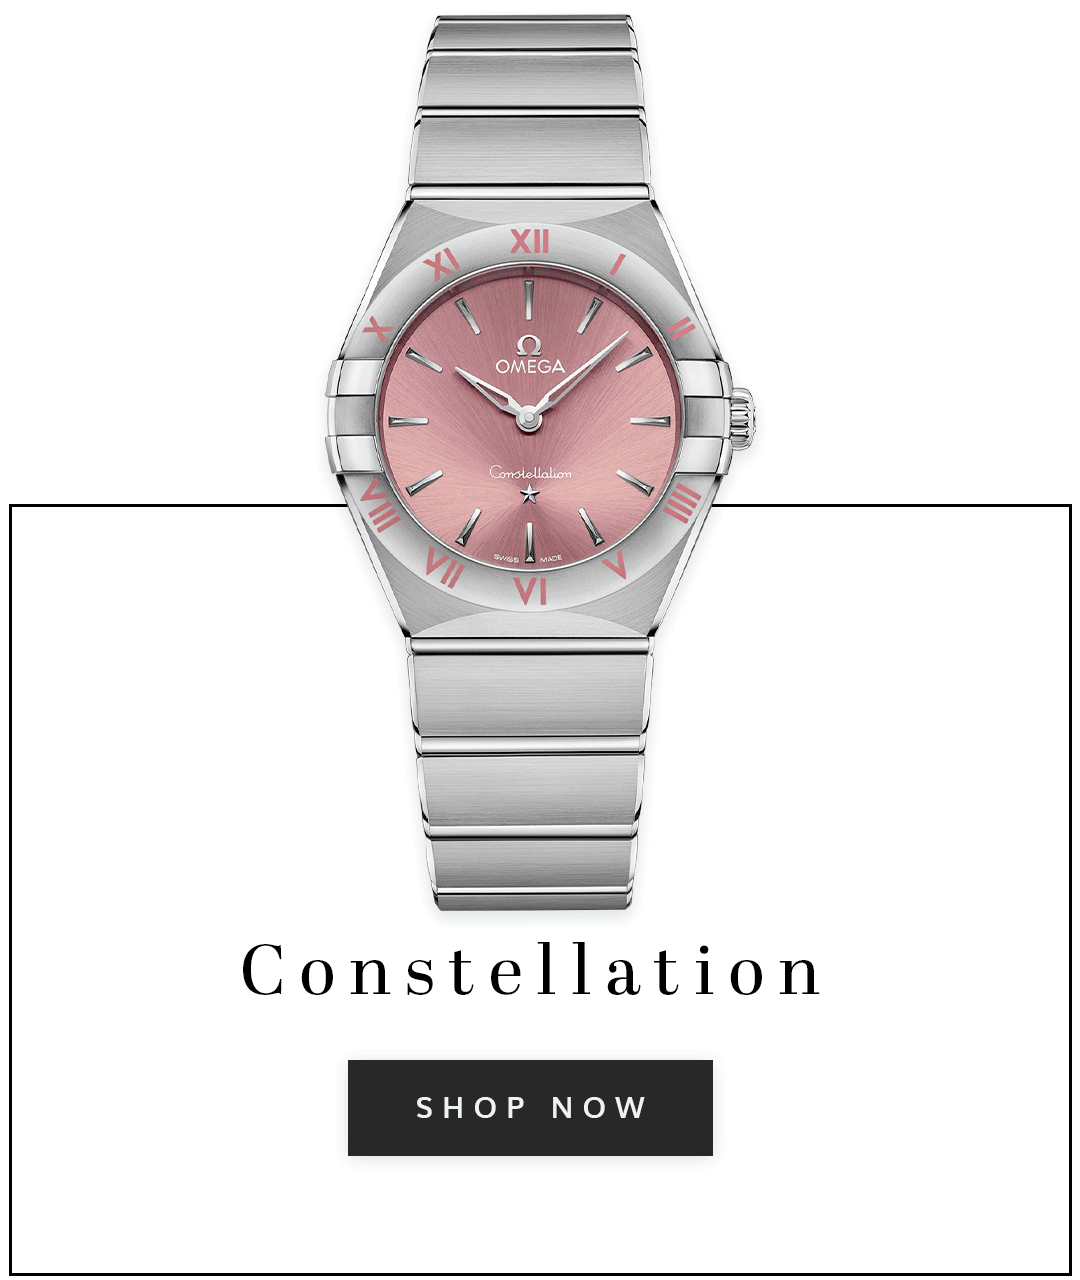 An OMEGA constellation watch with text shop now